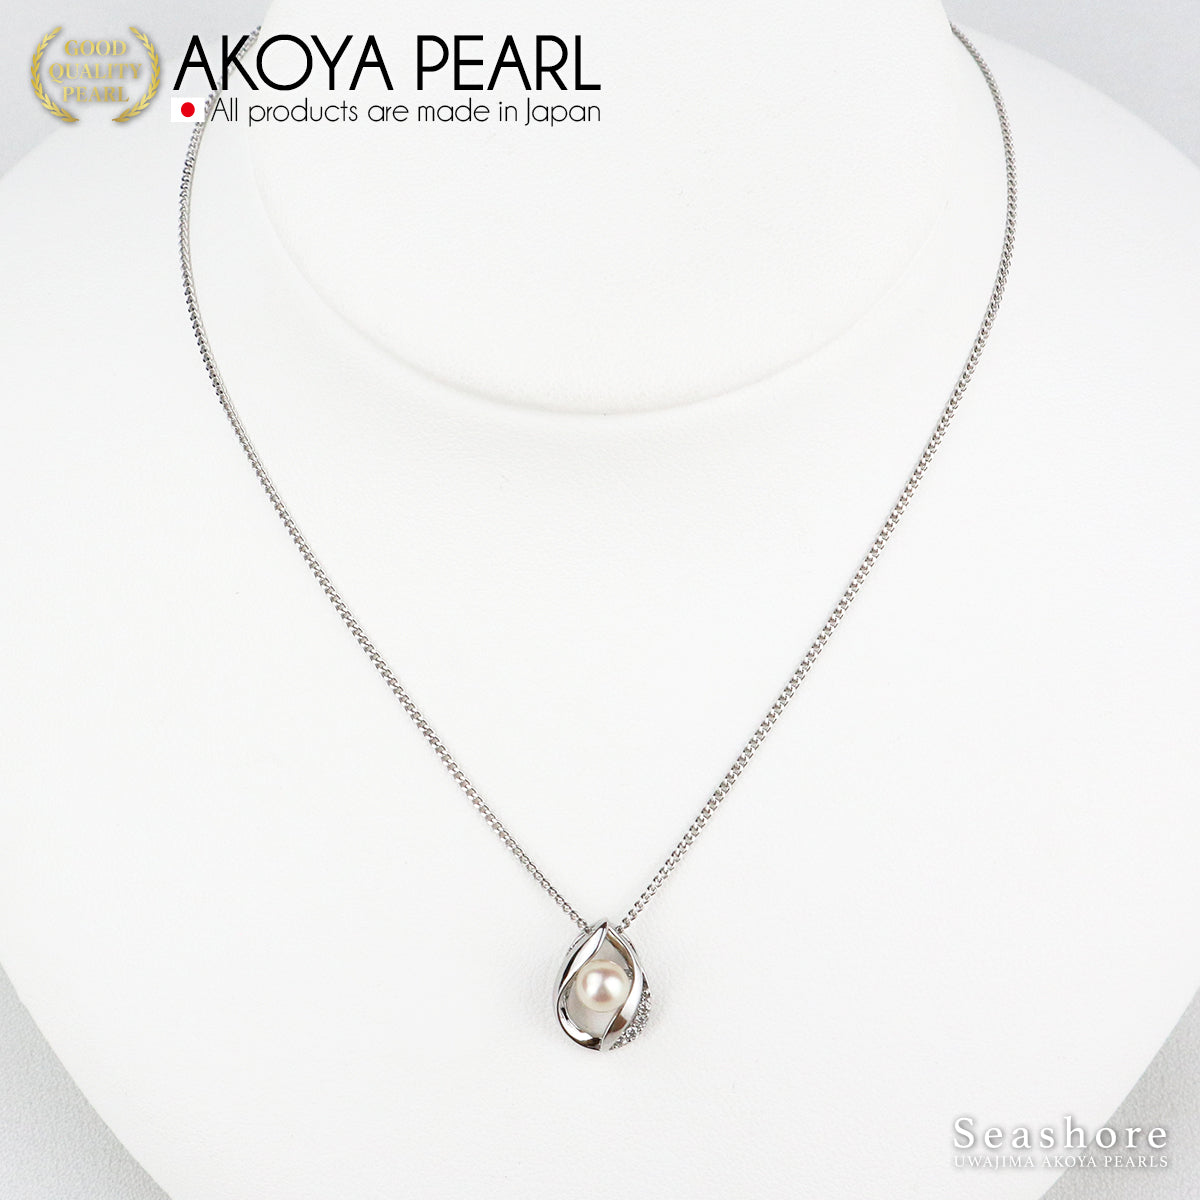 Akoya Pearl Single Pendant Drop White [5.0-5.5mm] Necklace SV925 Platinum Finish Pearl Necklace (3842)